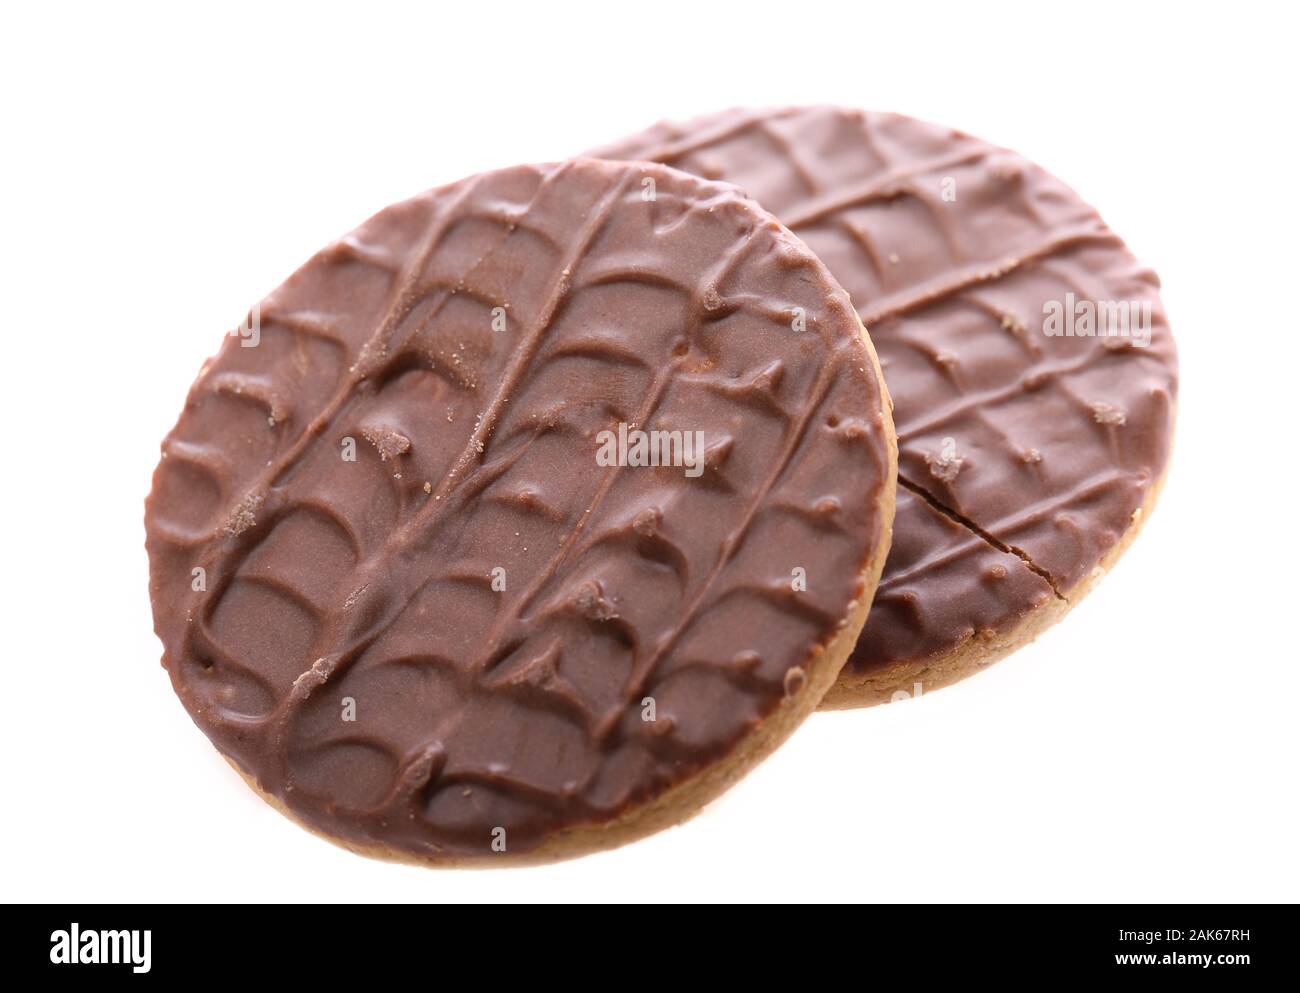 Milk Chocolate Digestive Biscuits on a white background Stock Photo